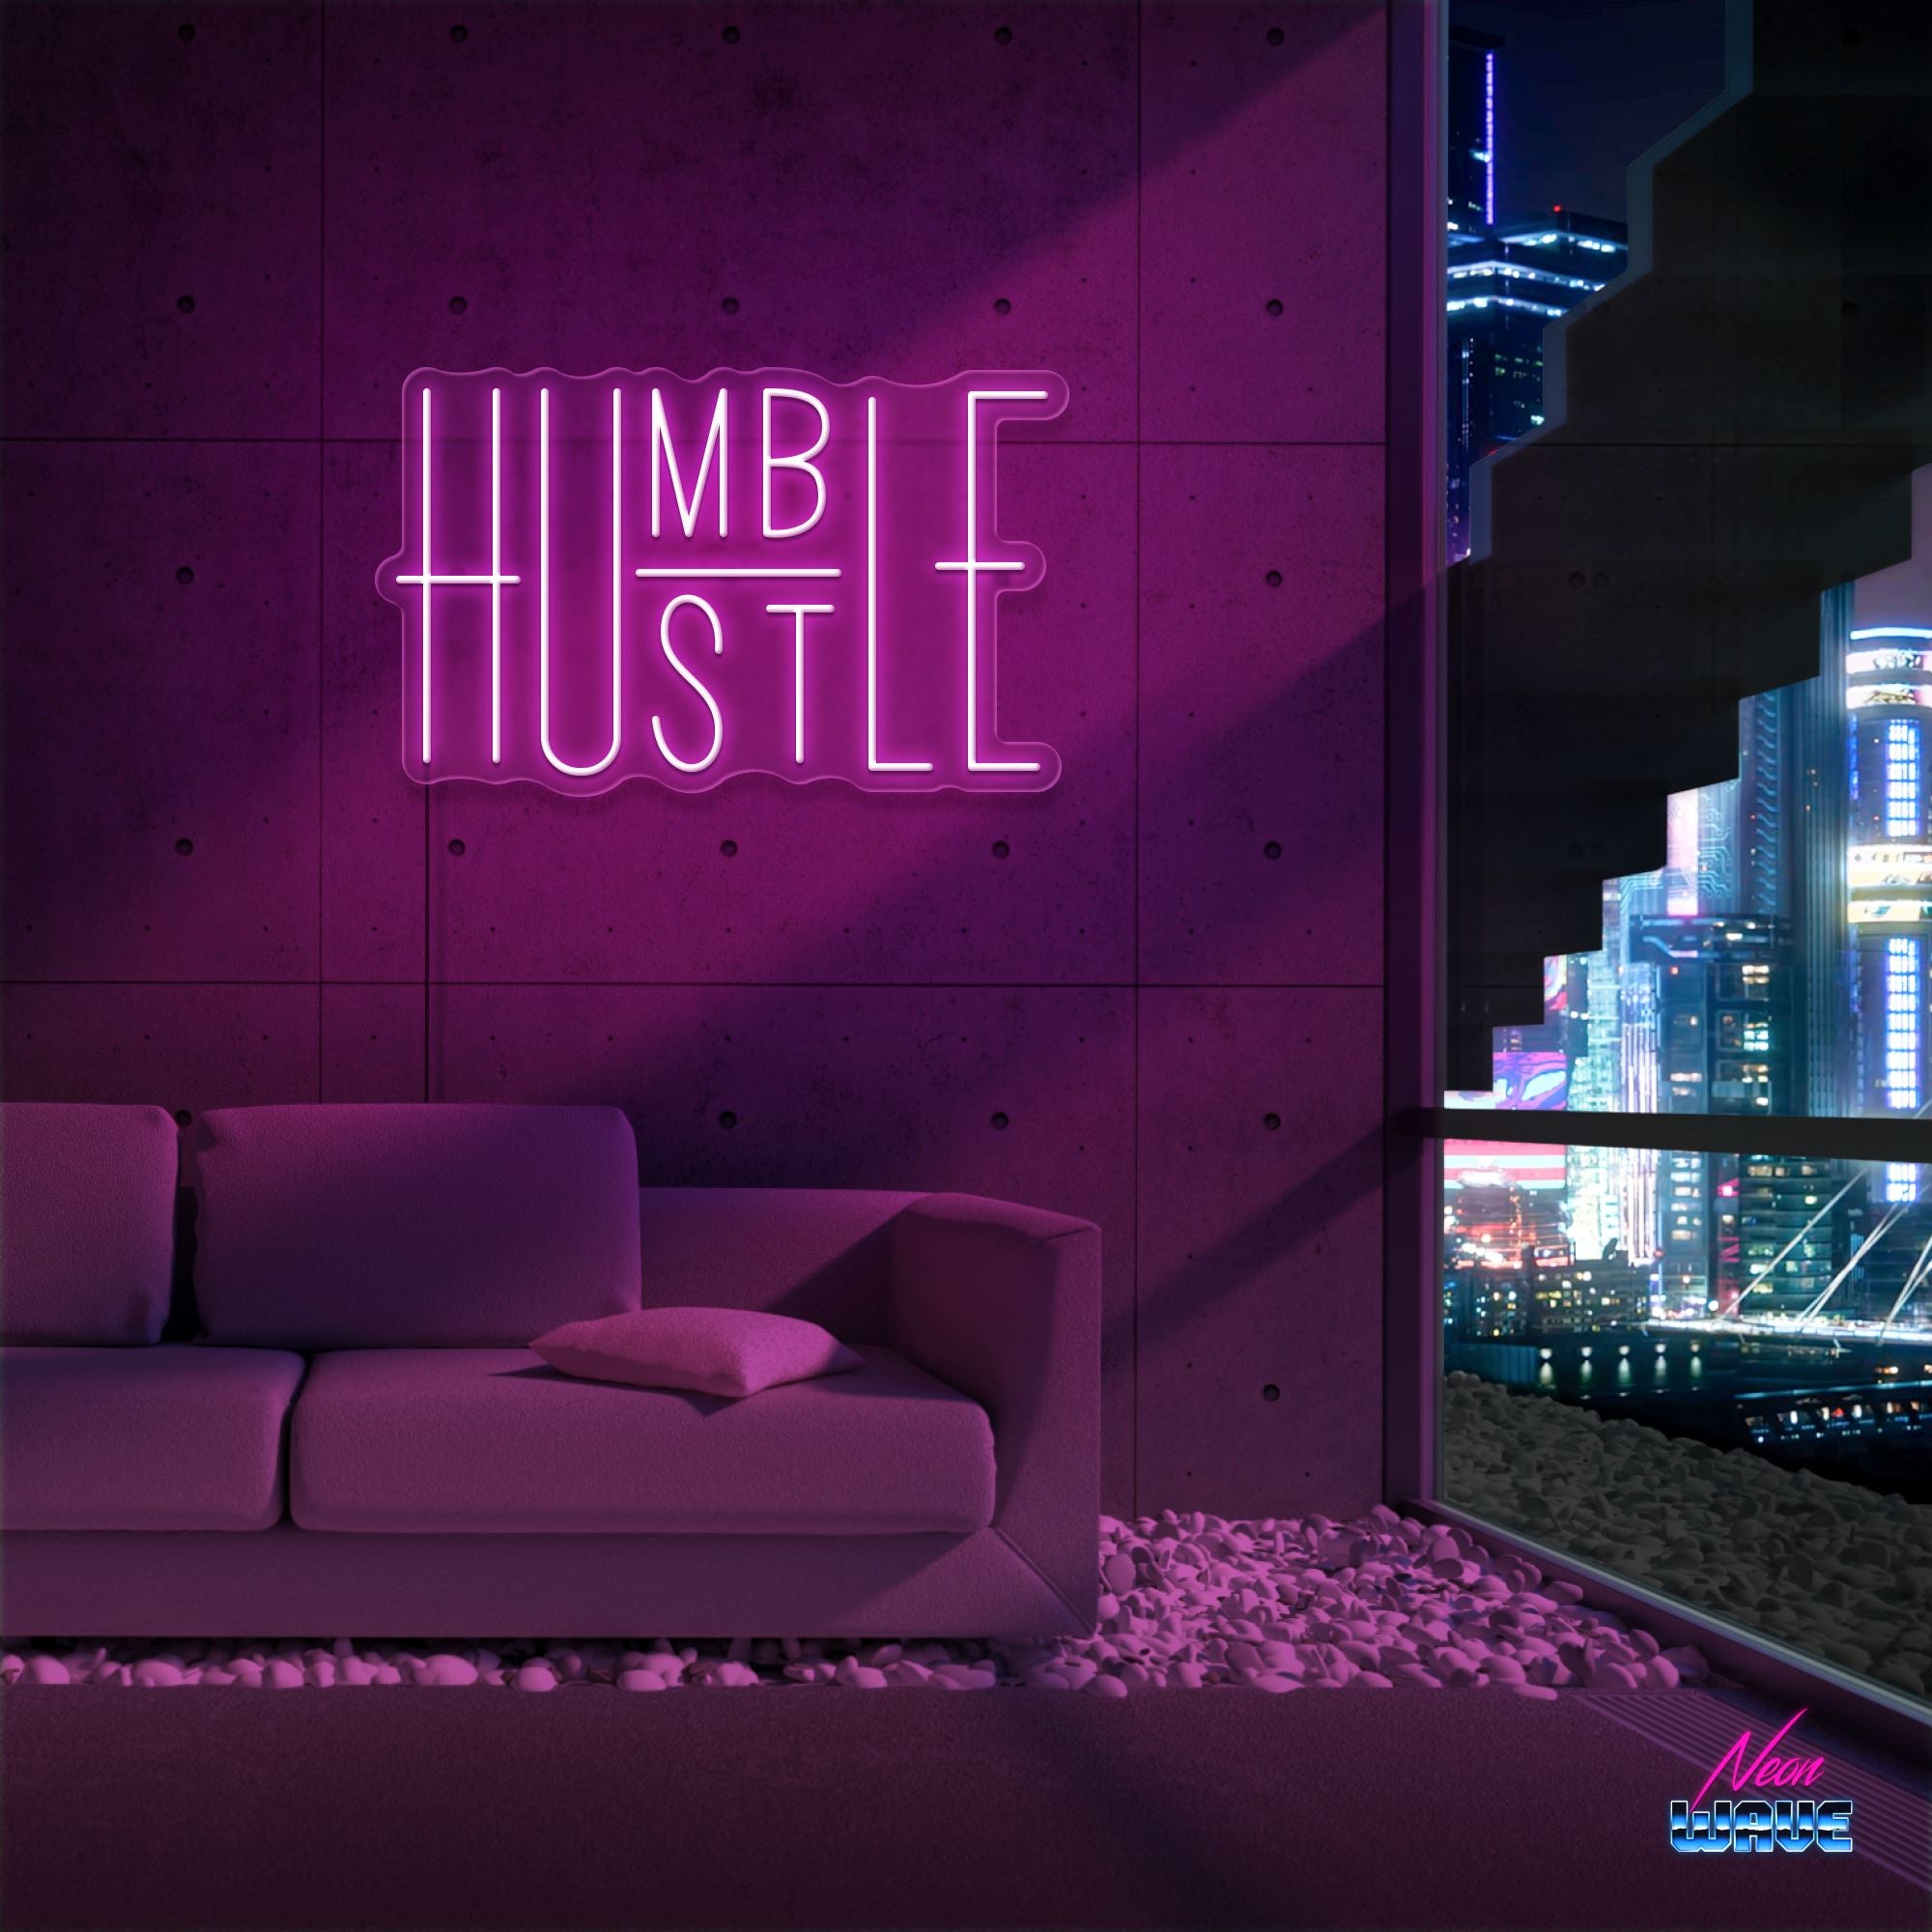 HUMBLE - HUSTLE Neon Sign Neonwave.ch 50cm Pink 